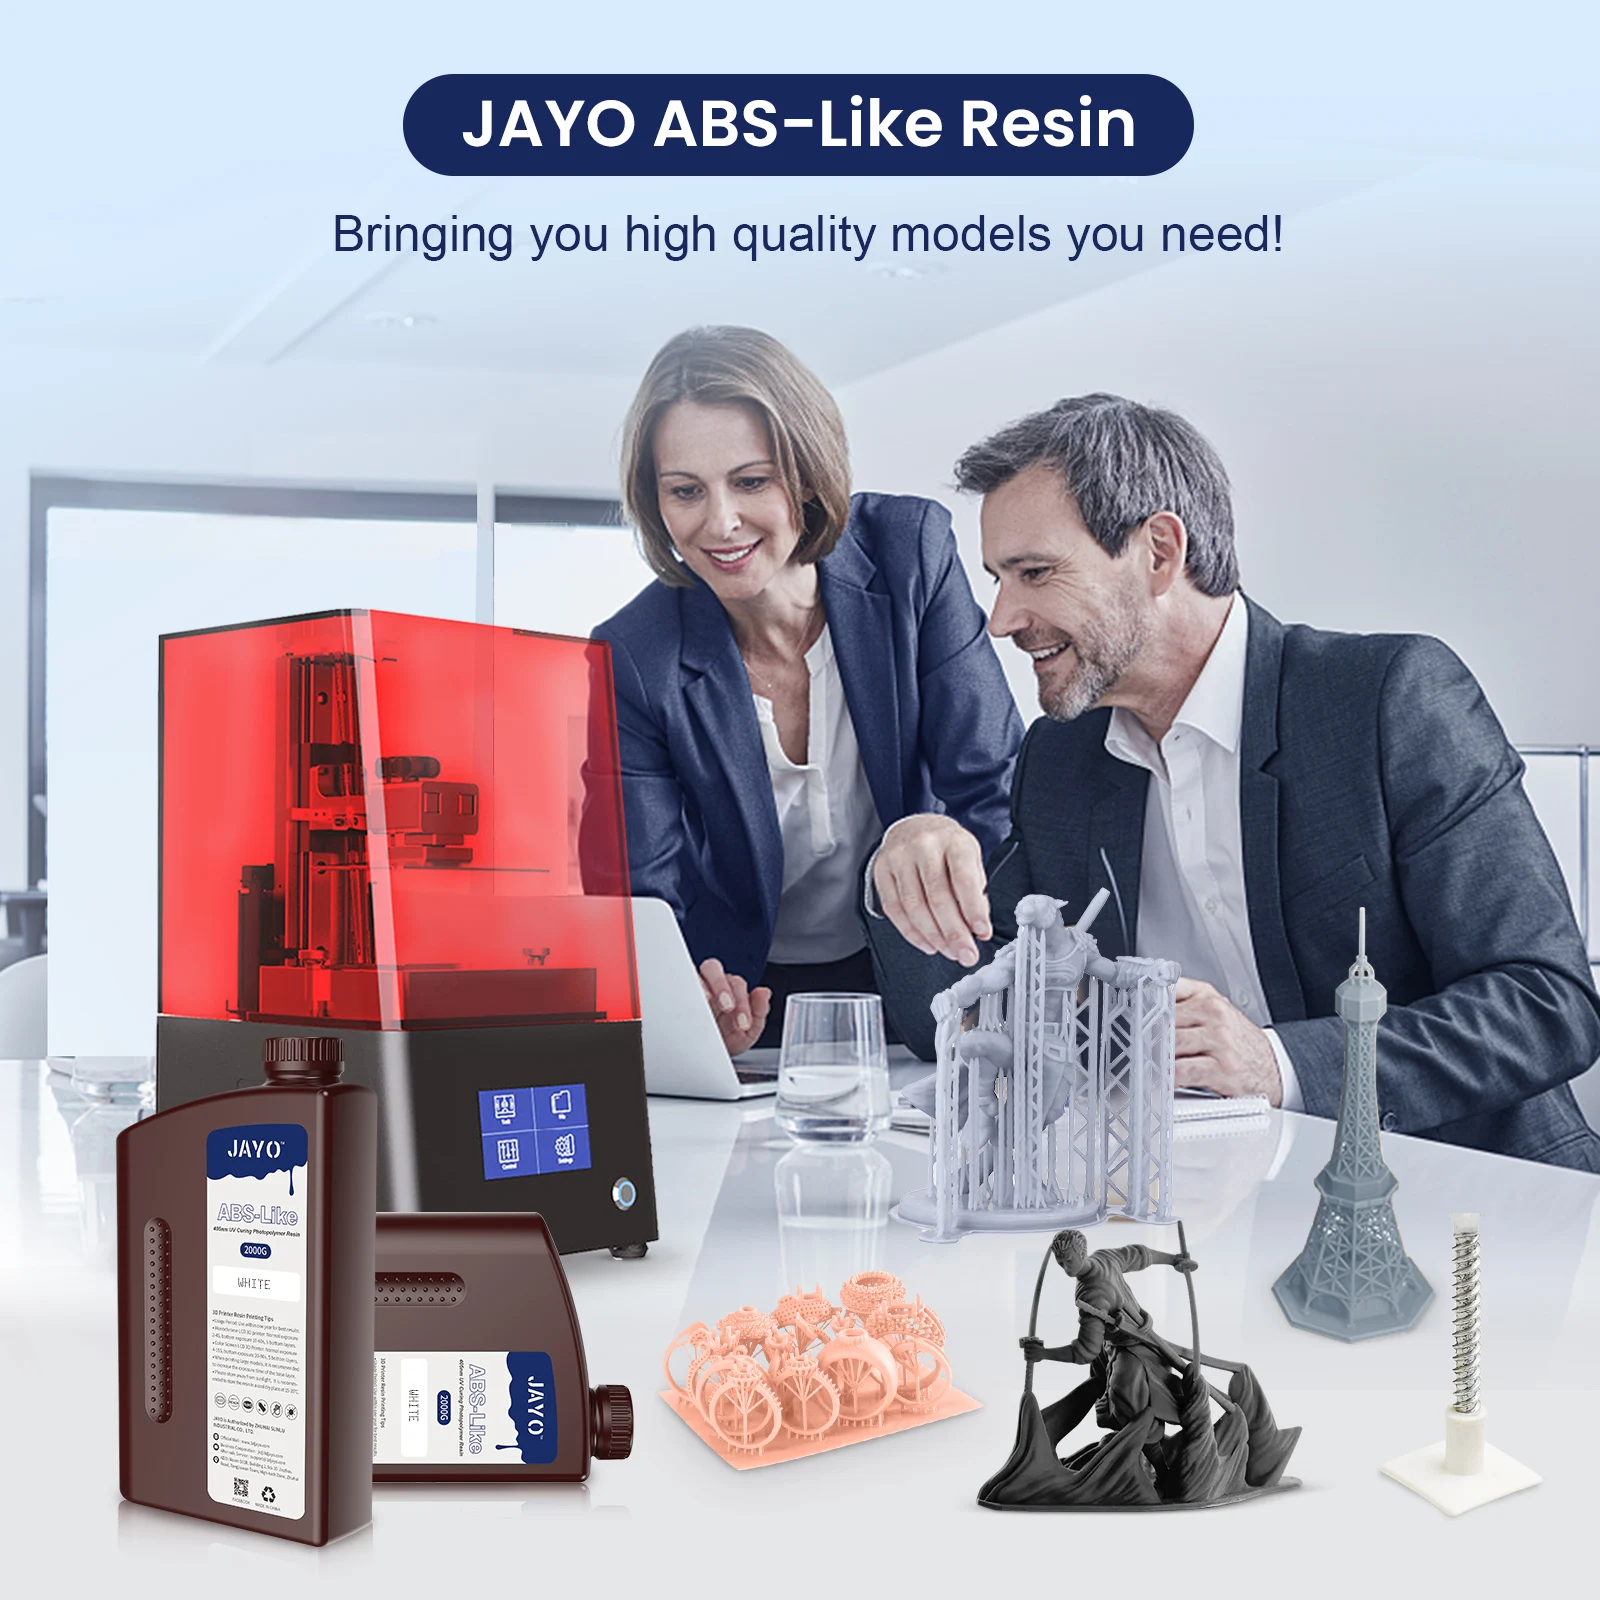 JAYO 5KG UV Resin 3D Printer 405nm Liquid Photopolymer/Plant-Based/ ABS-Like Printing Material High Precision Quick Curing images - 6